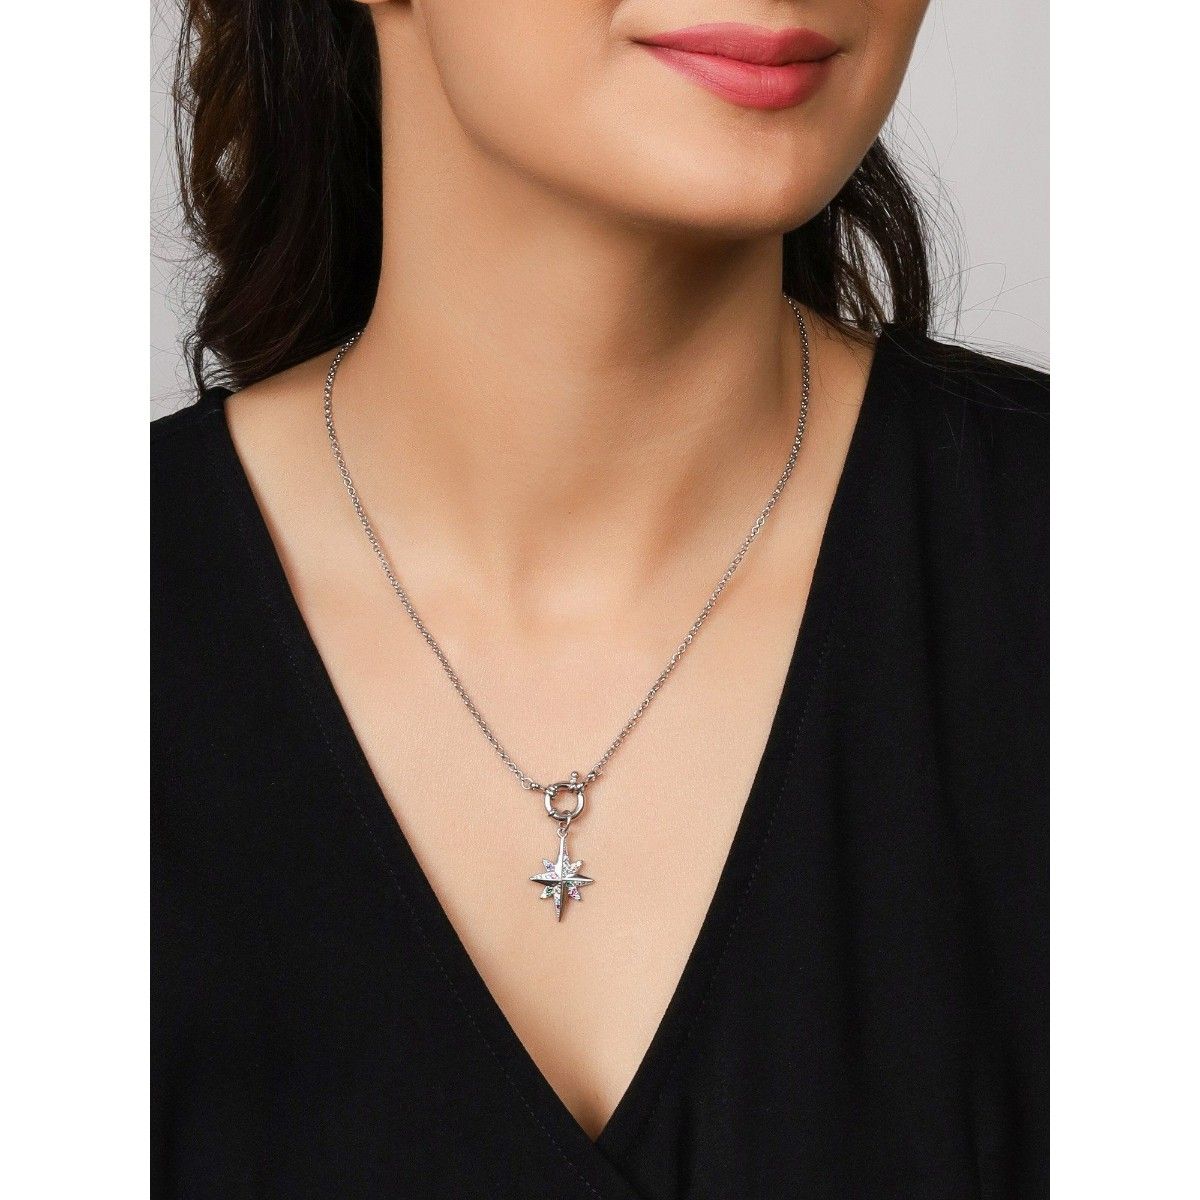 Montana Silversmiths NC3978RG Against the Light Cross Necklace